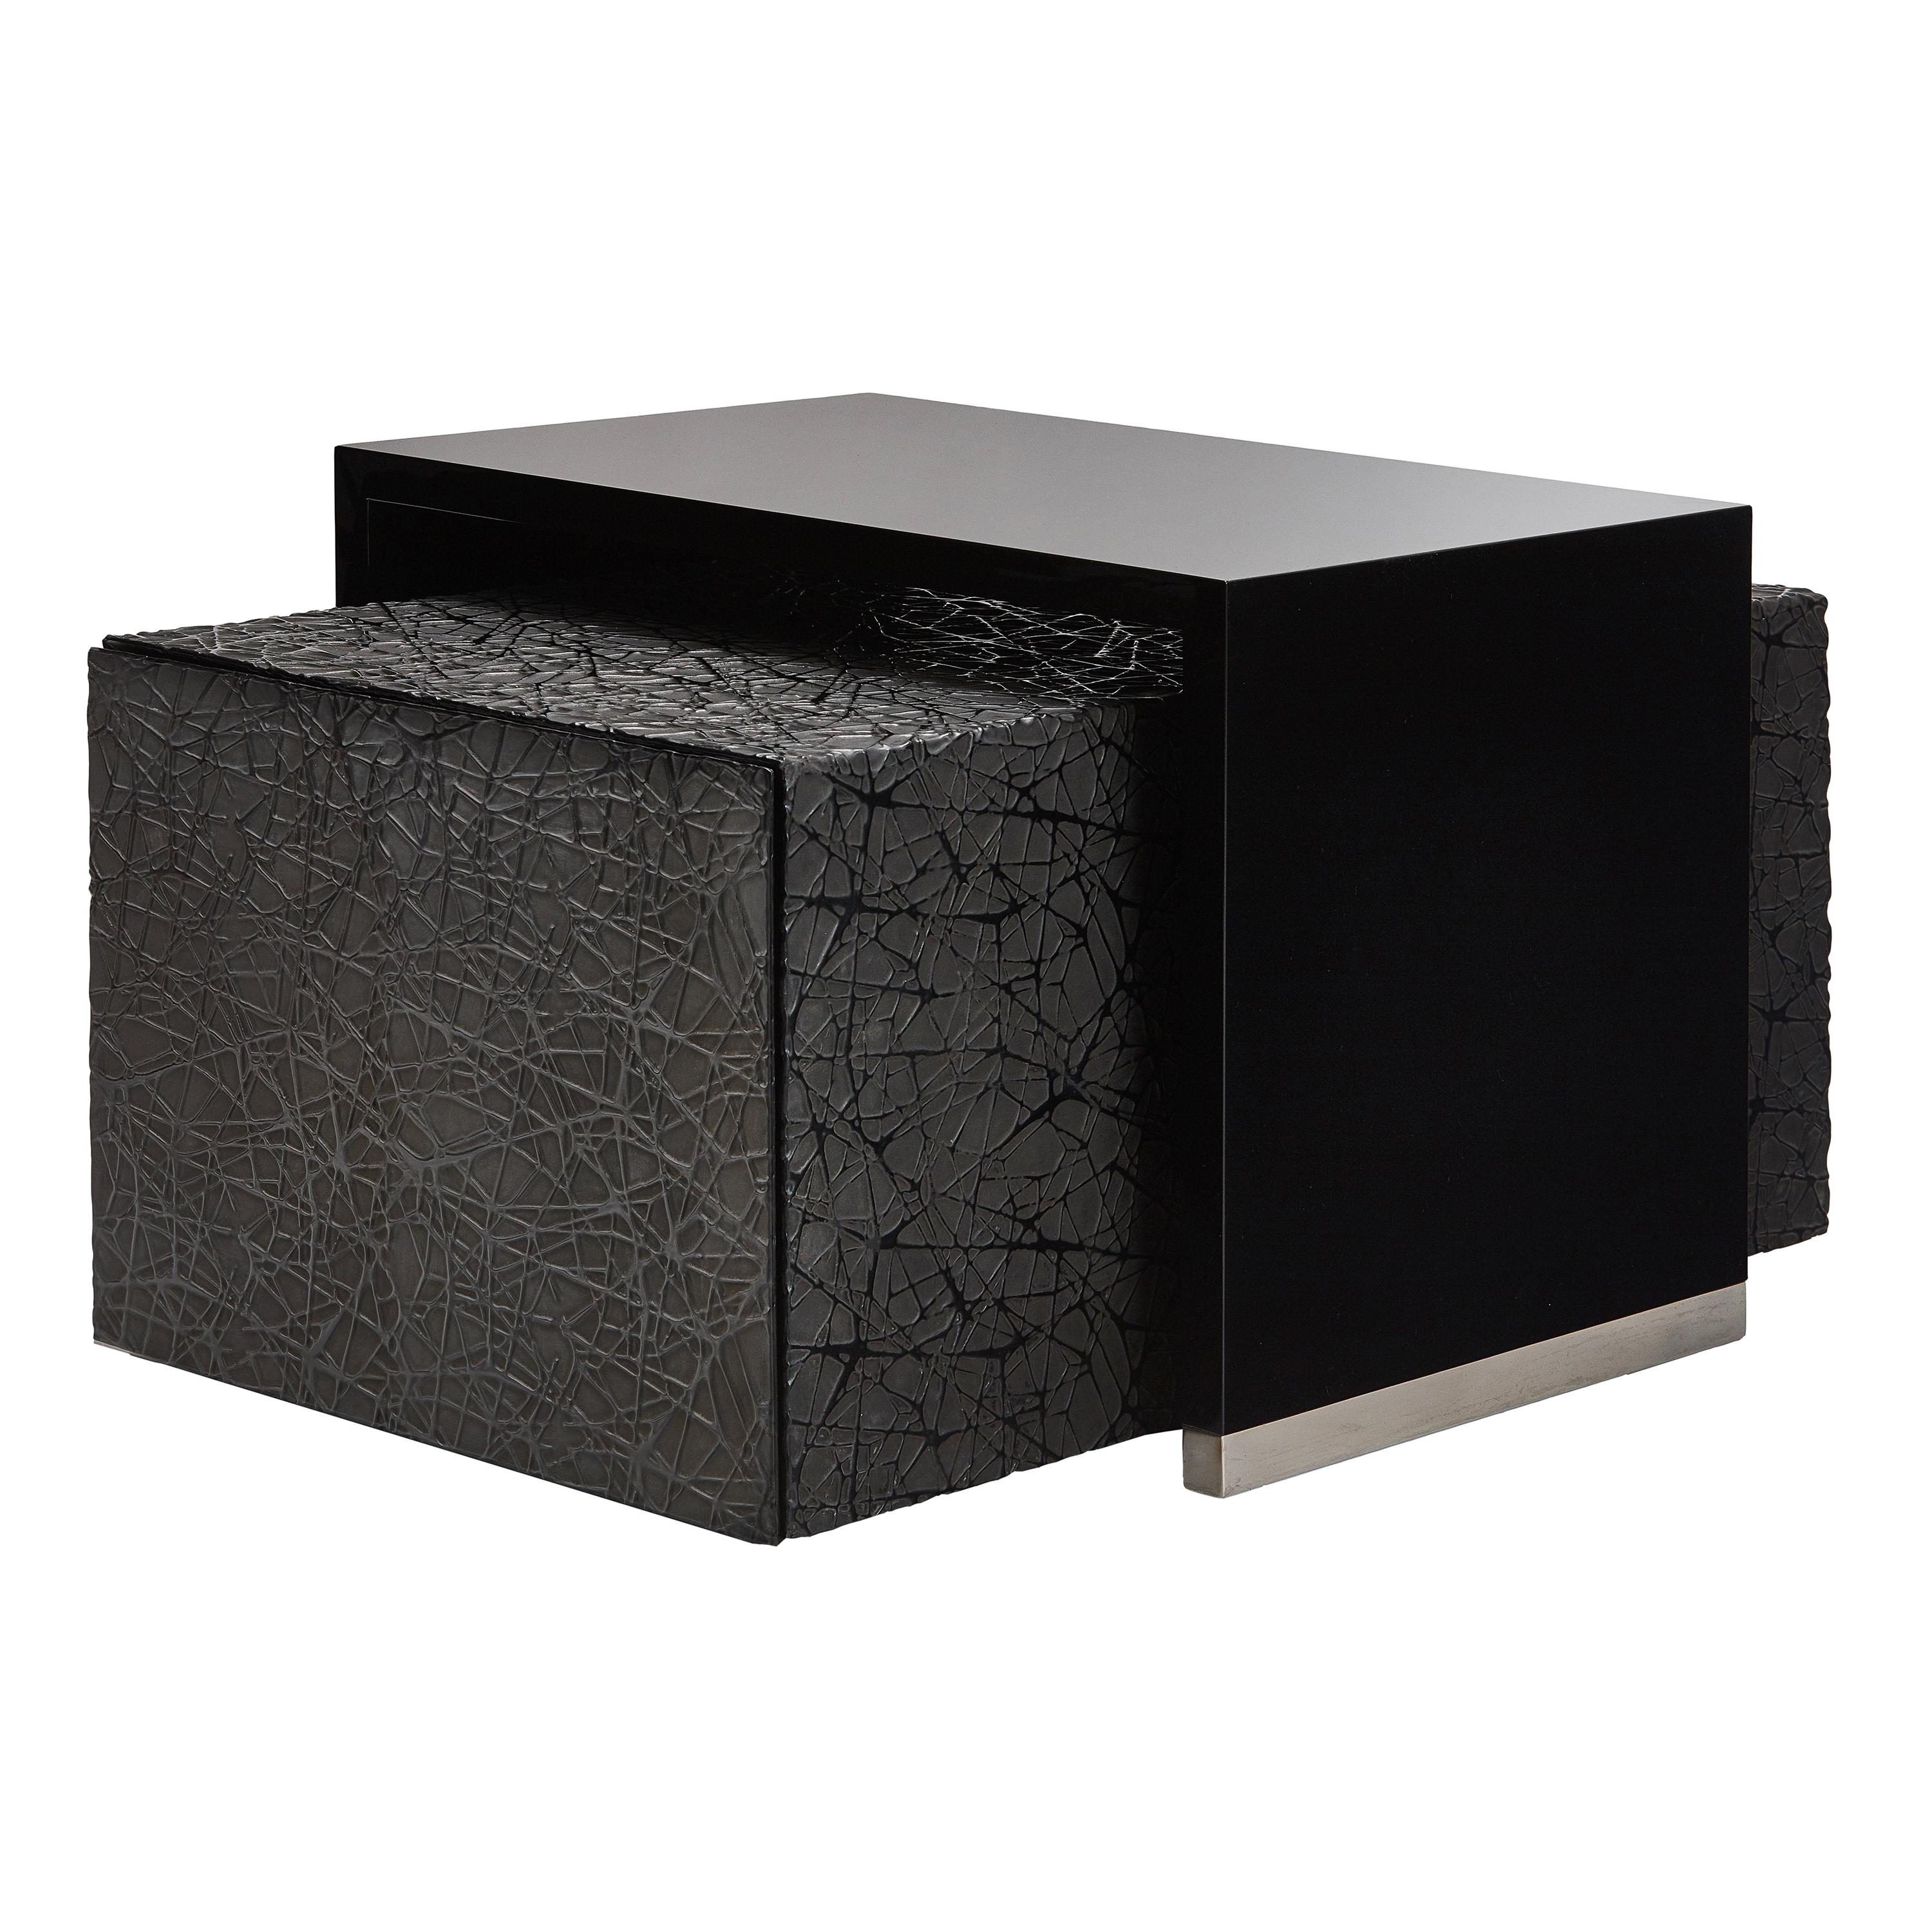 Duo Side Tables with Piano Black Lacquer and Resin Art Texture, Available Now For Sale